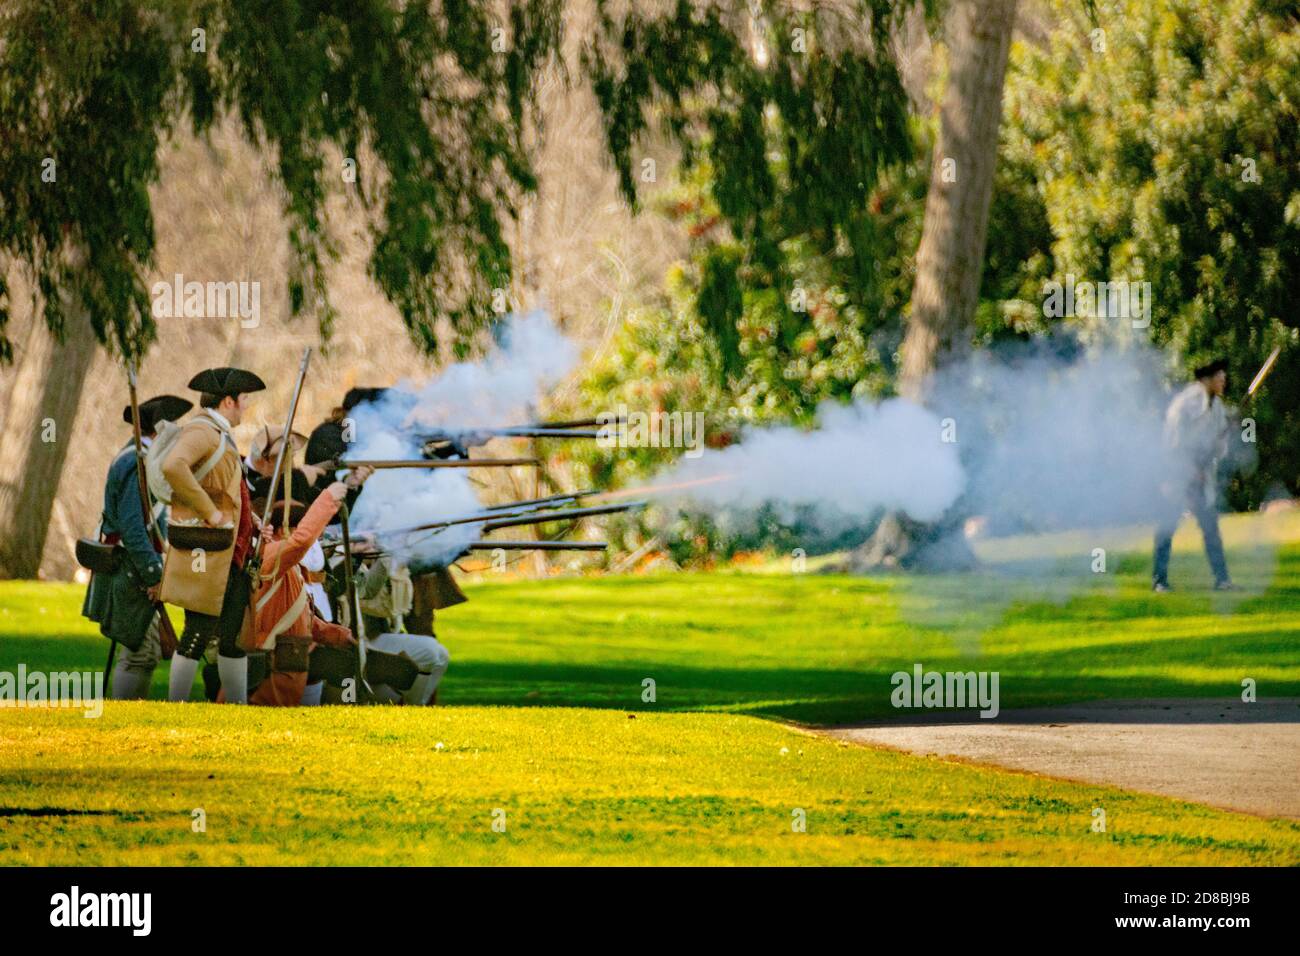 Rebel soldiers return musket fire at a historical reenactment of an American Revolutionary War battle in a Huntington Beach, CA, park. Stock Photo